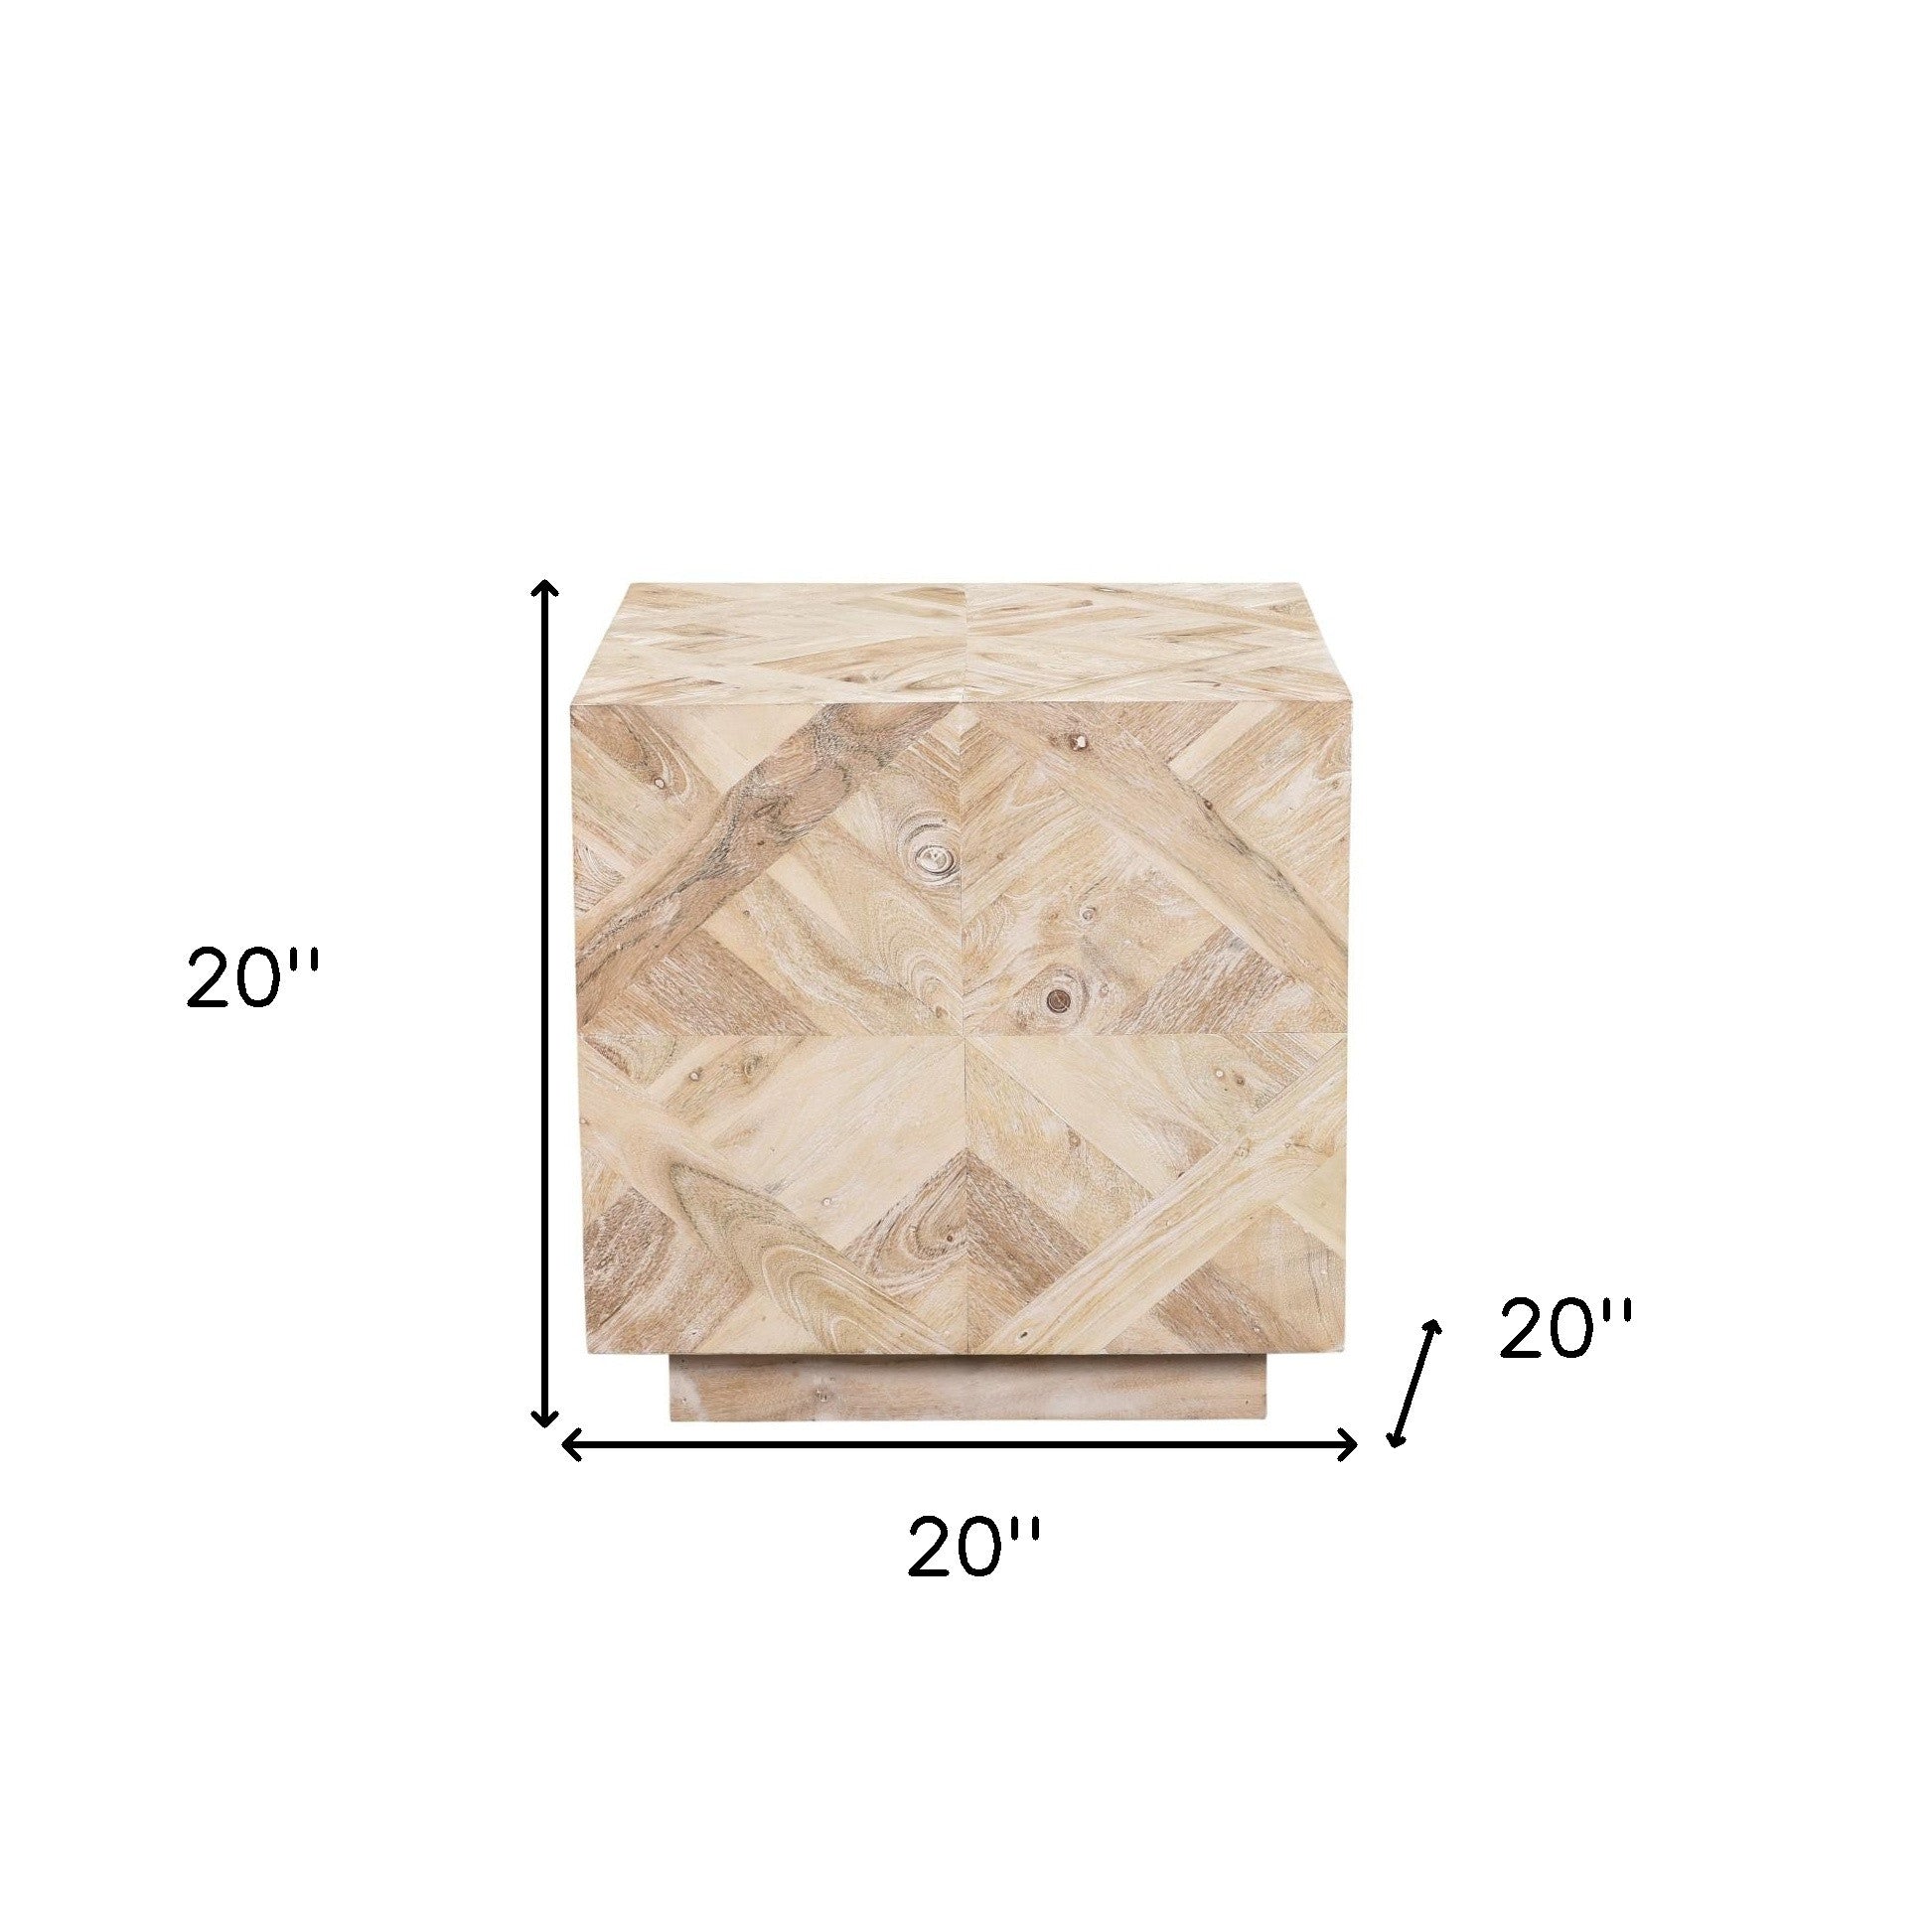 20" Tan Solid and Manufactured Wood Square End Table